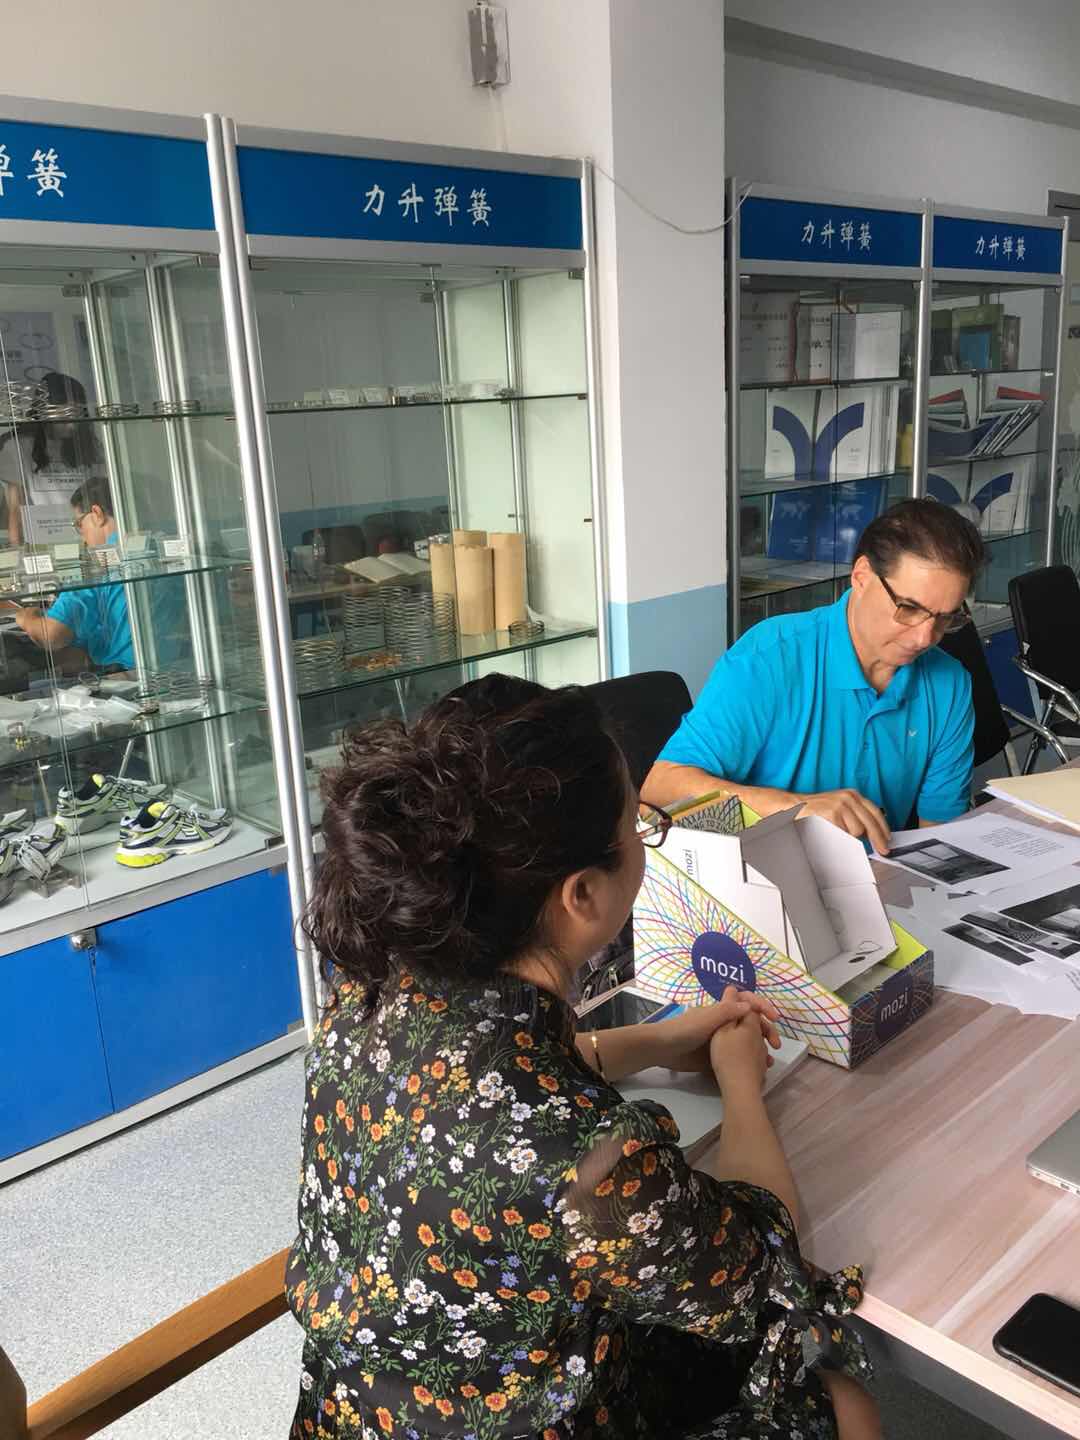 American customers visit our company